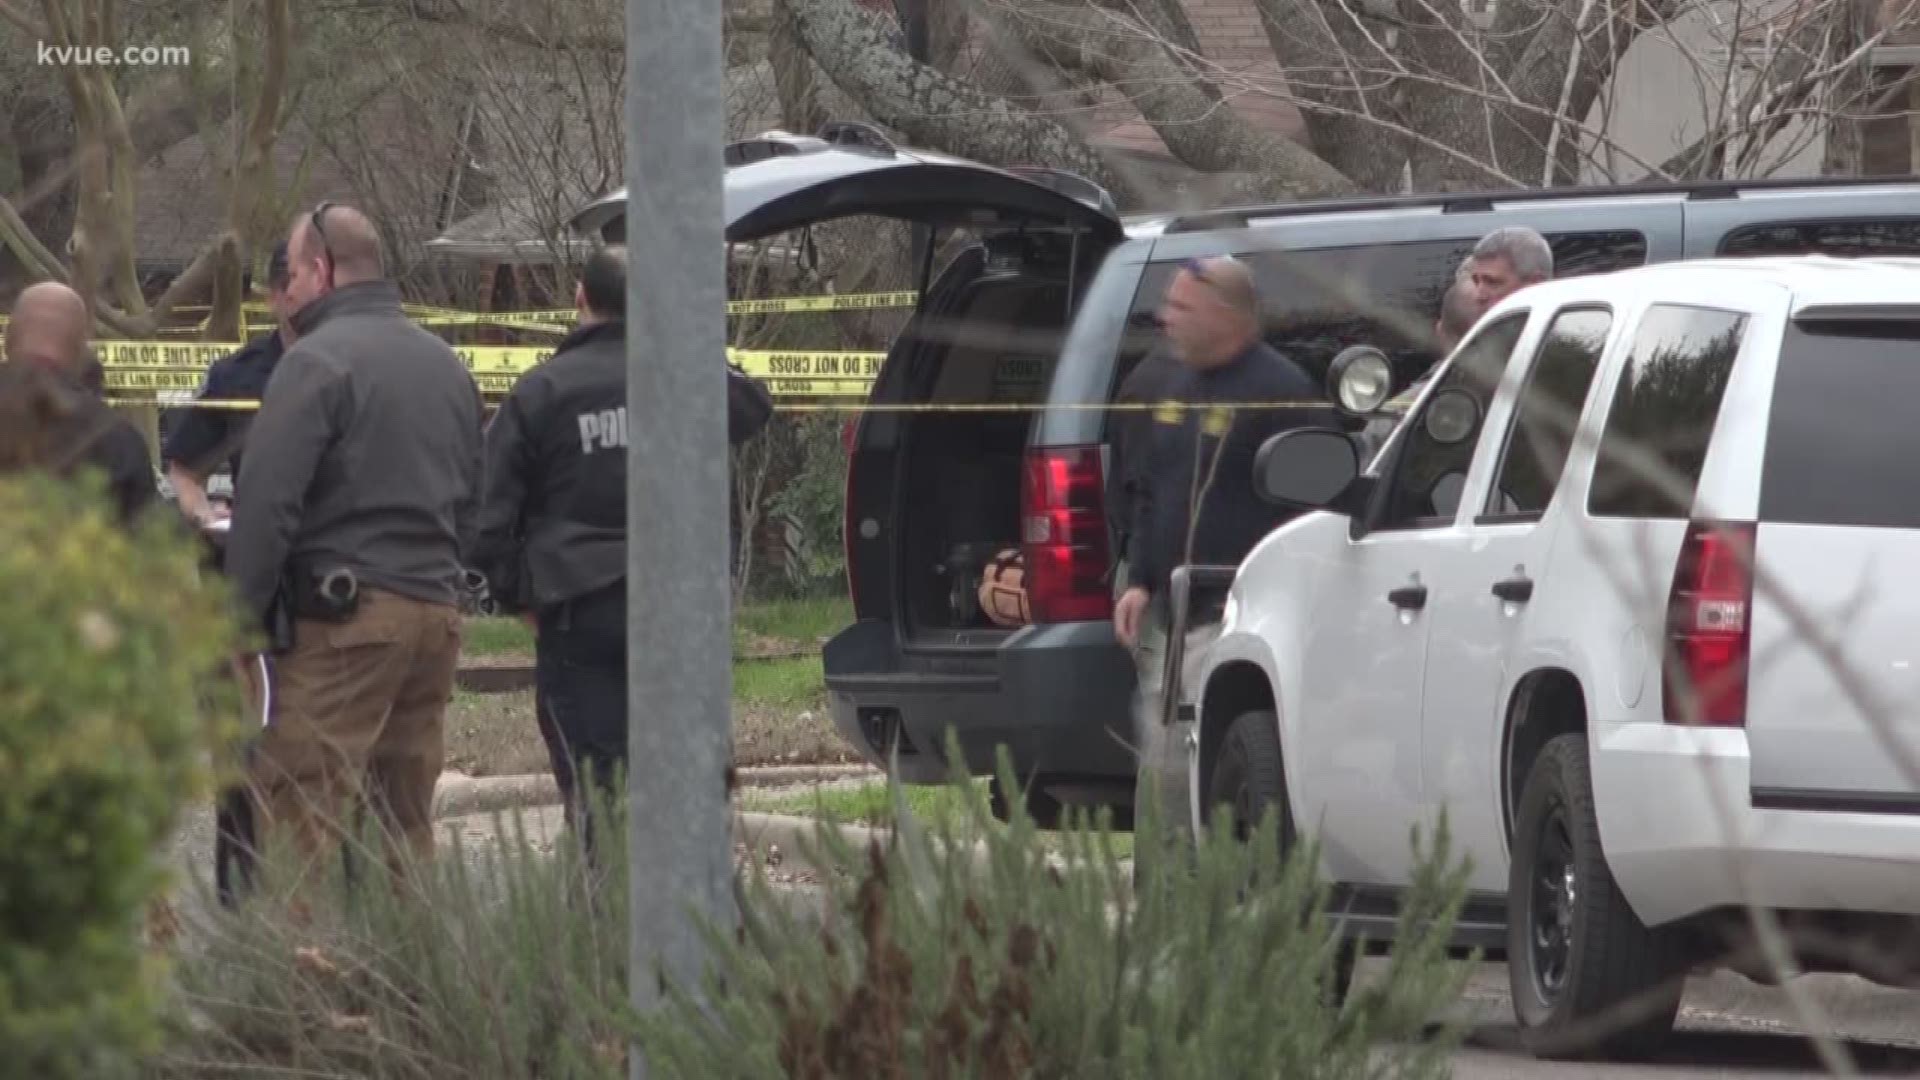 After a deadly explosion at a house in northeast Austin, police are back peddling, saying what they once classified as a murder is now being labeled suspicious.